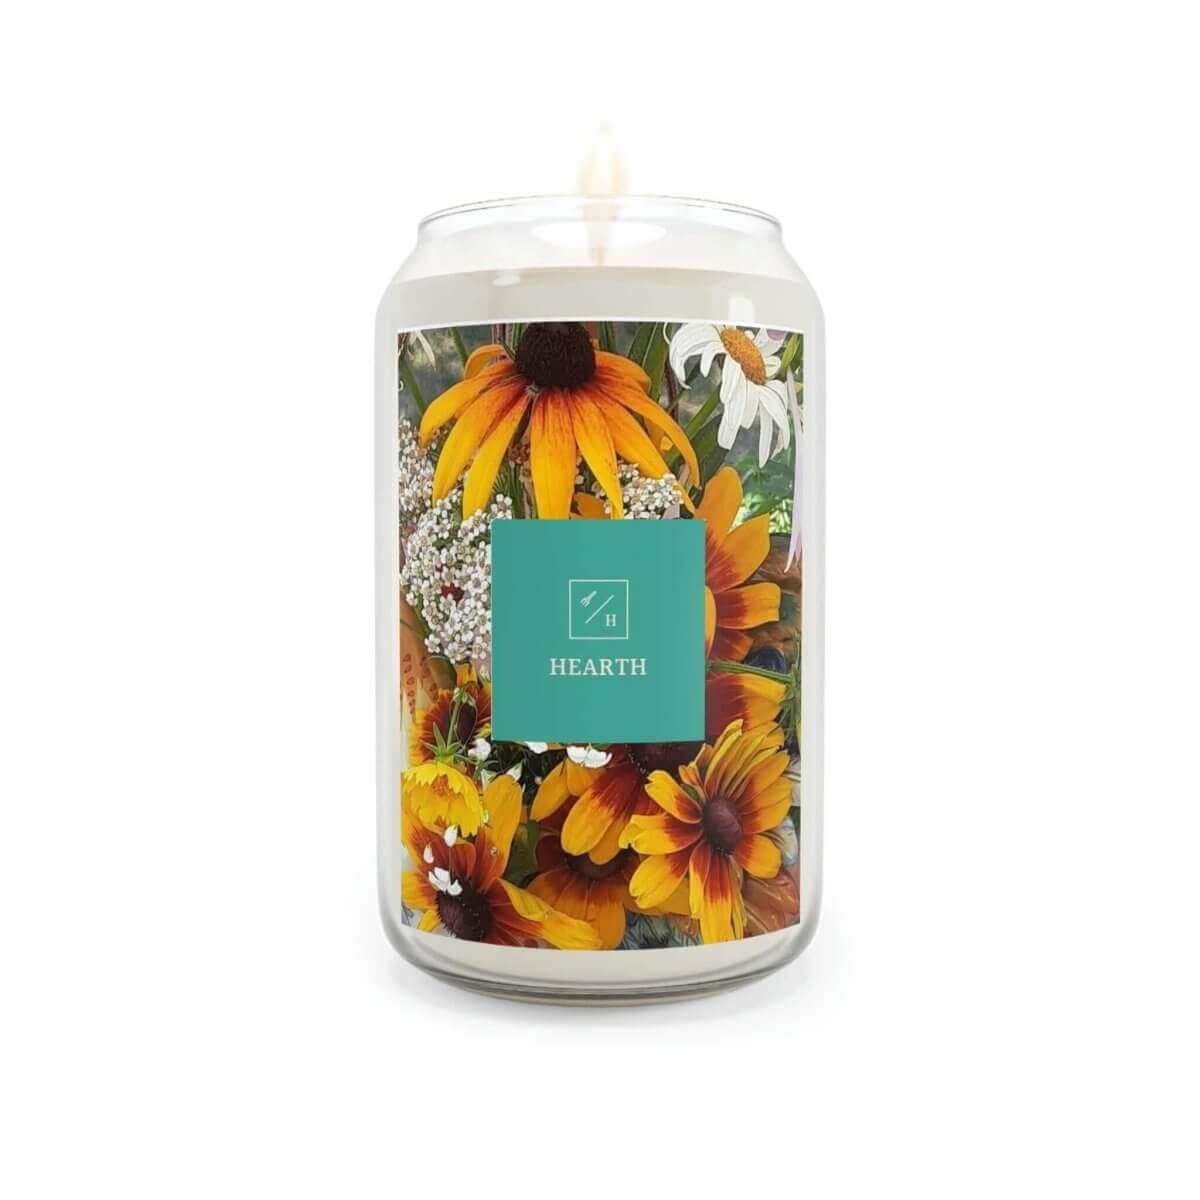 Scented Natural Soy Wax Candle 13.75oz - Hearth Home & Living